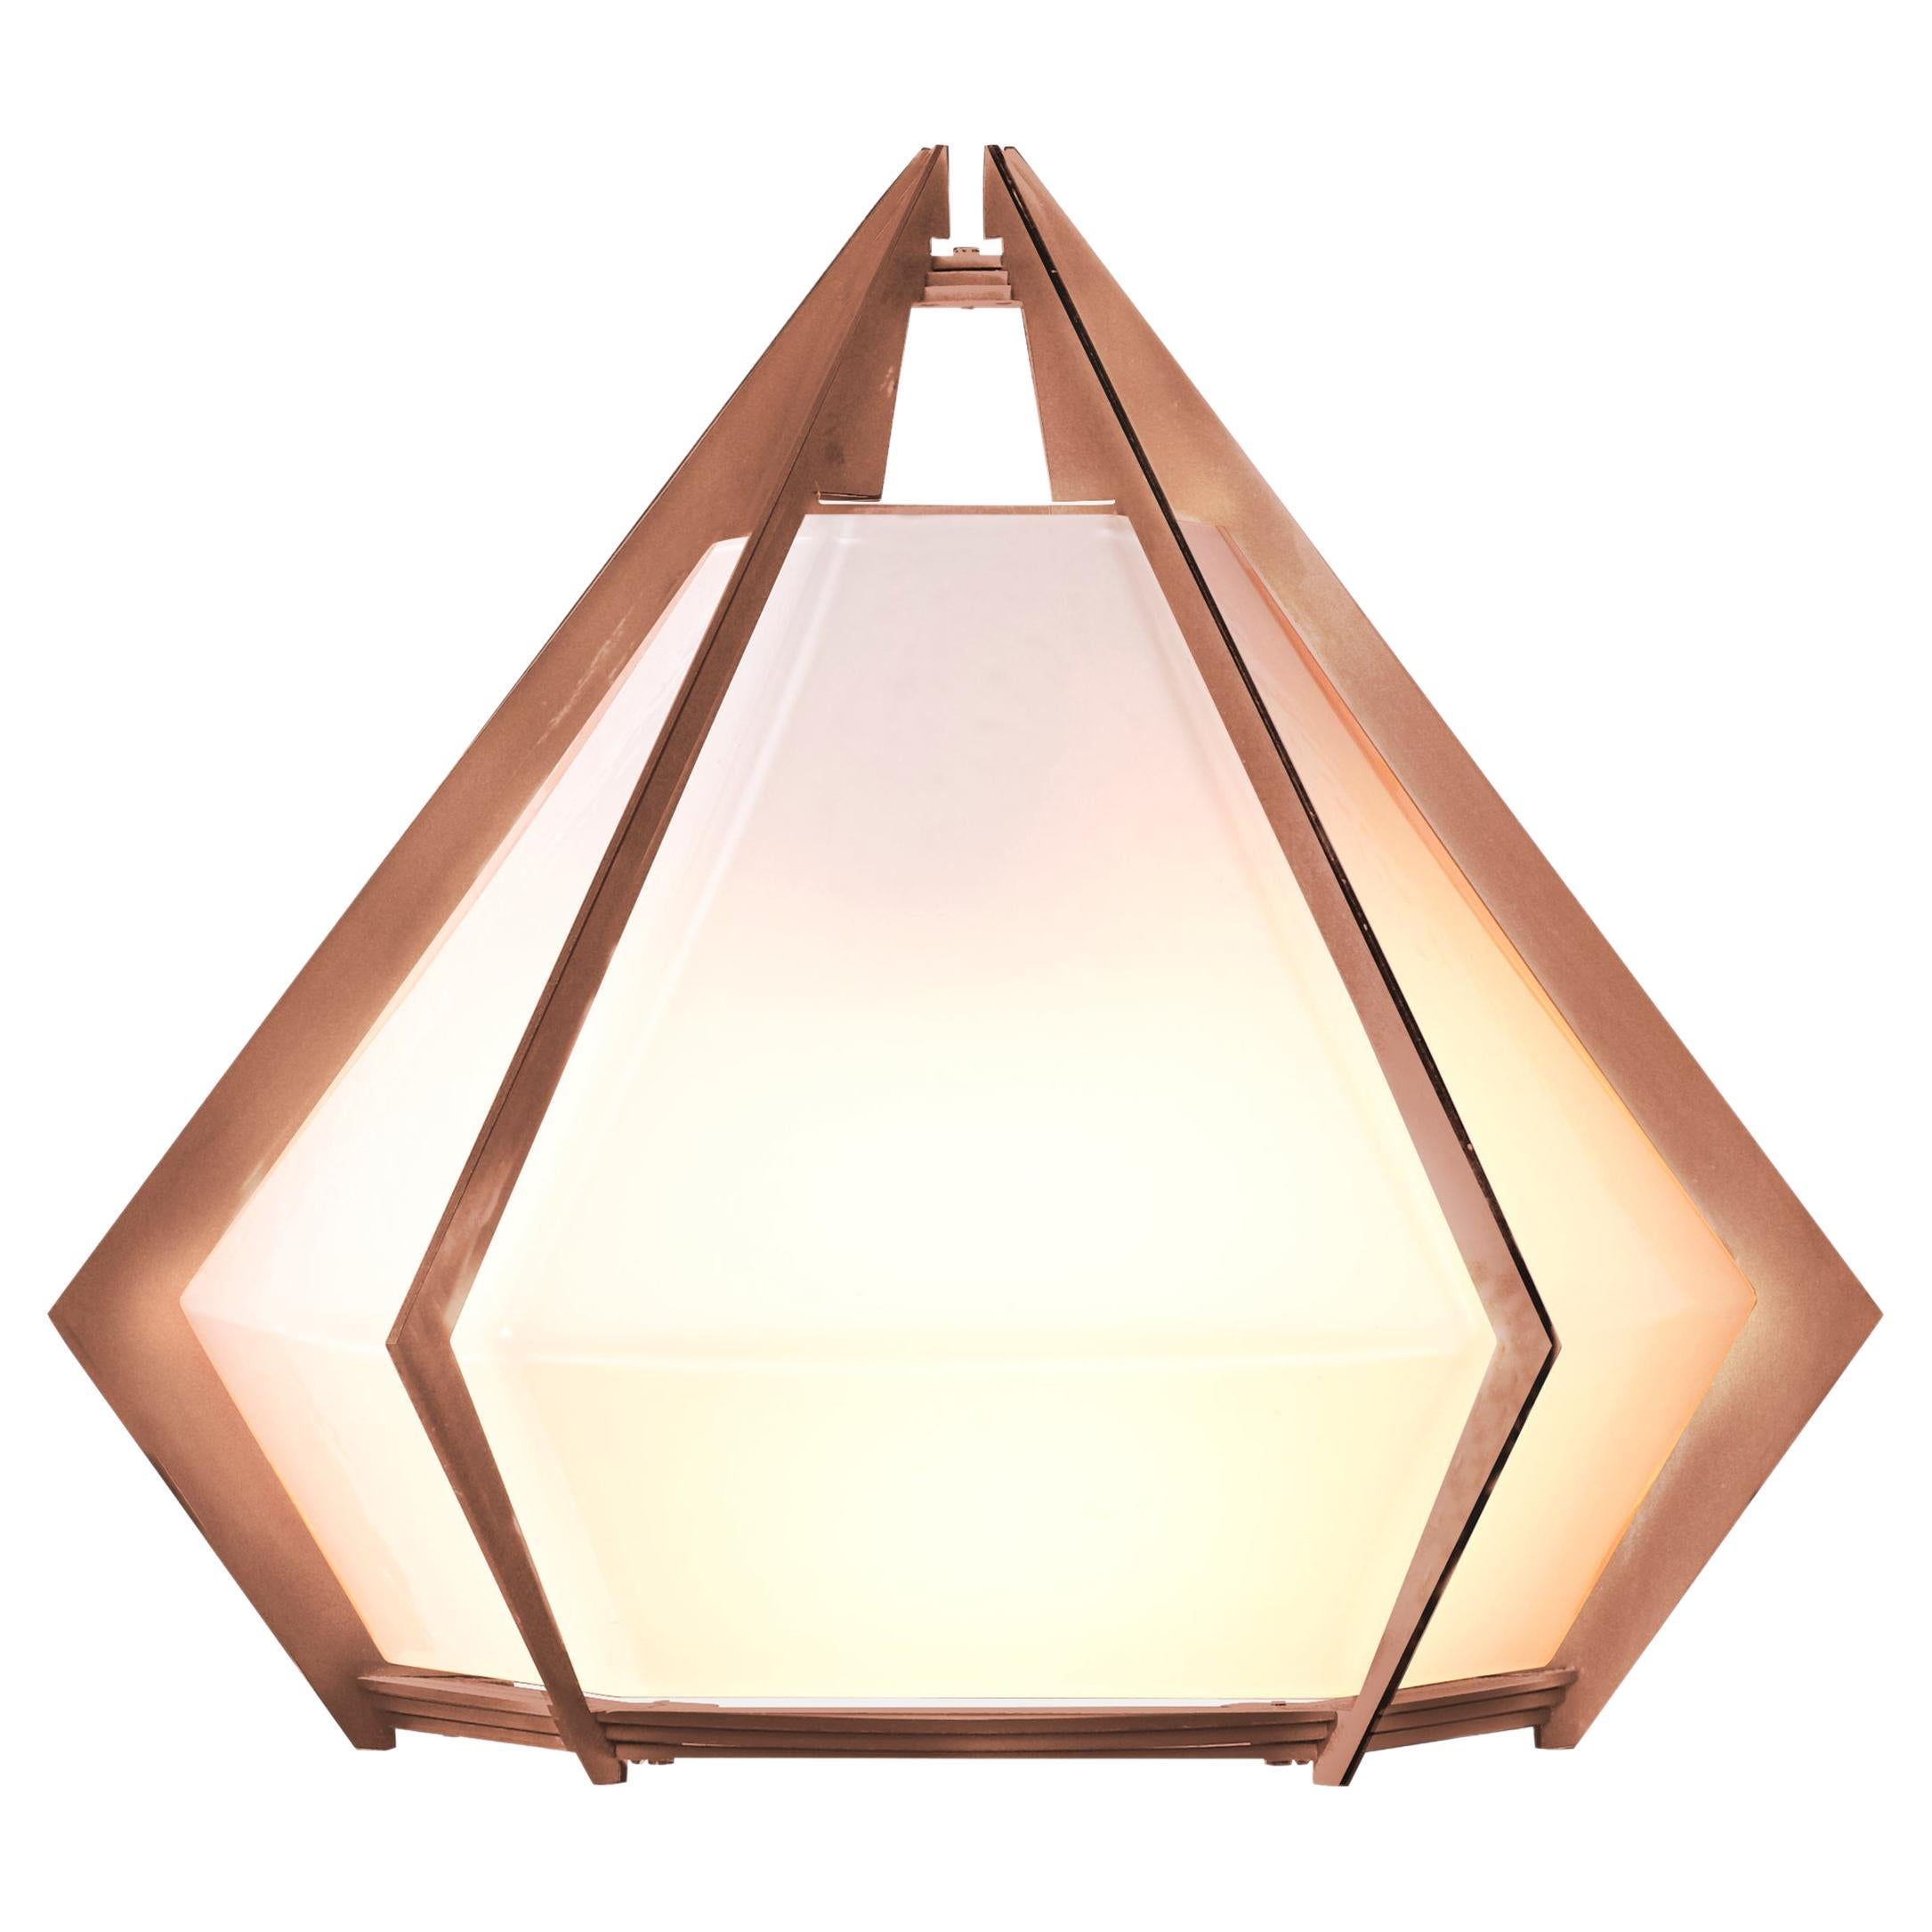 Harlow Wall Sconce in Satin Copper & Alabaster White Glass